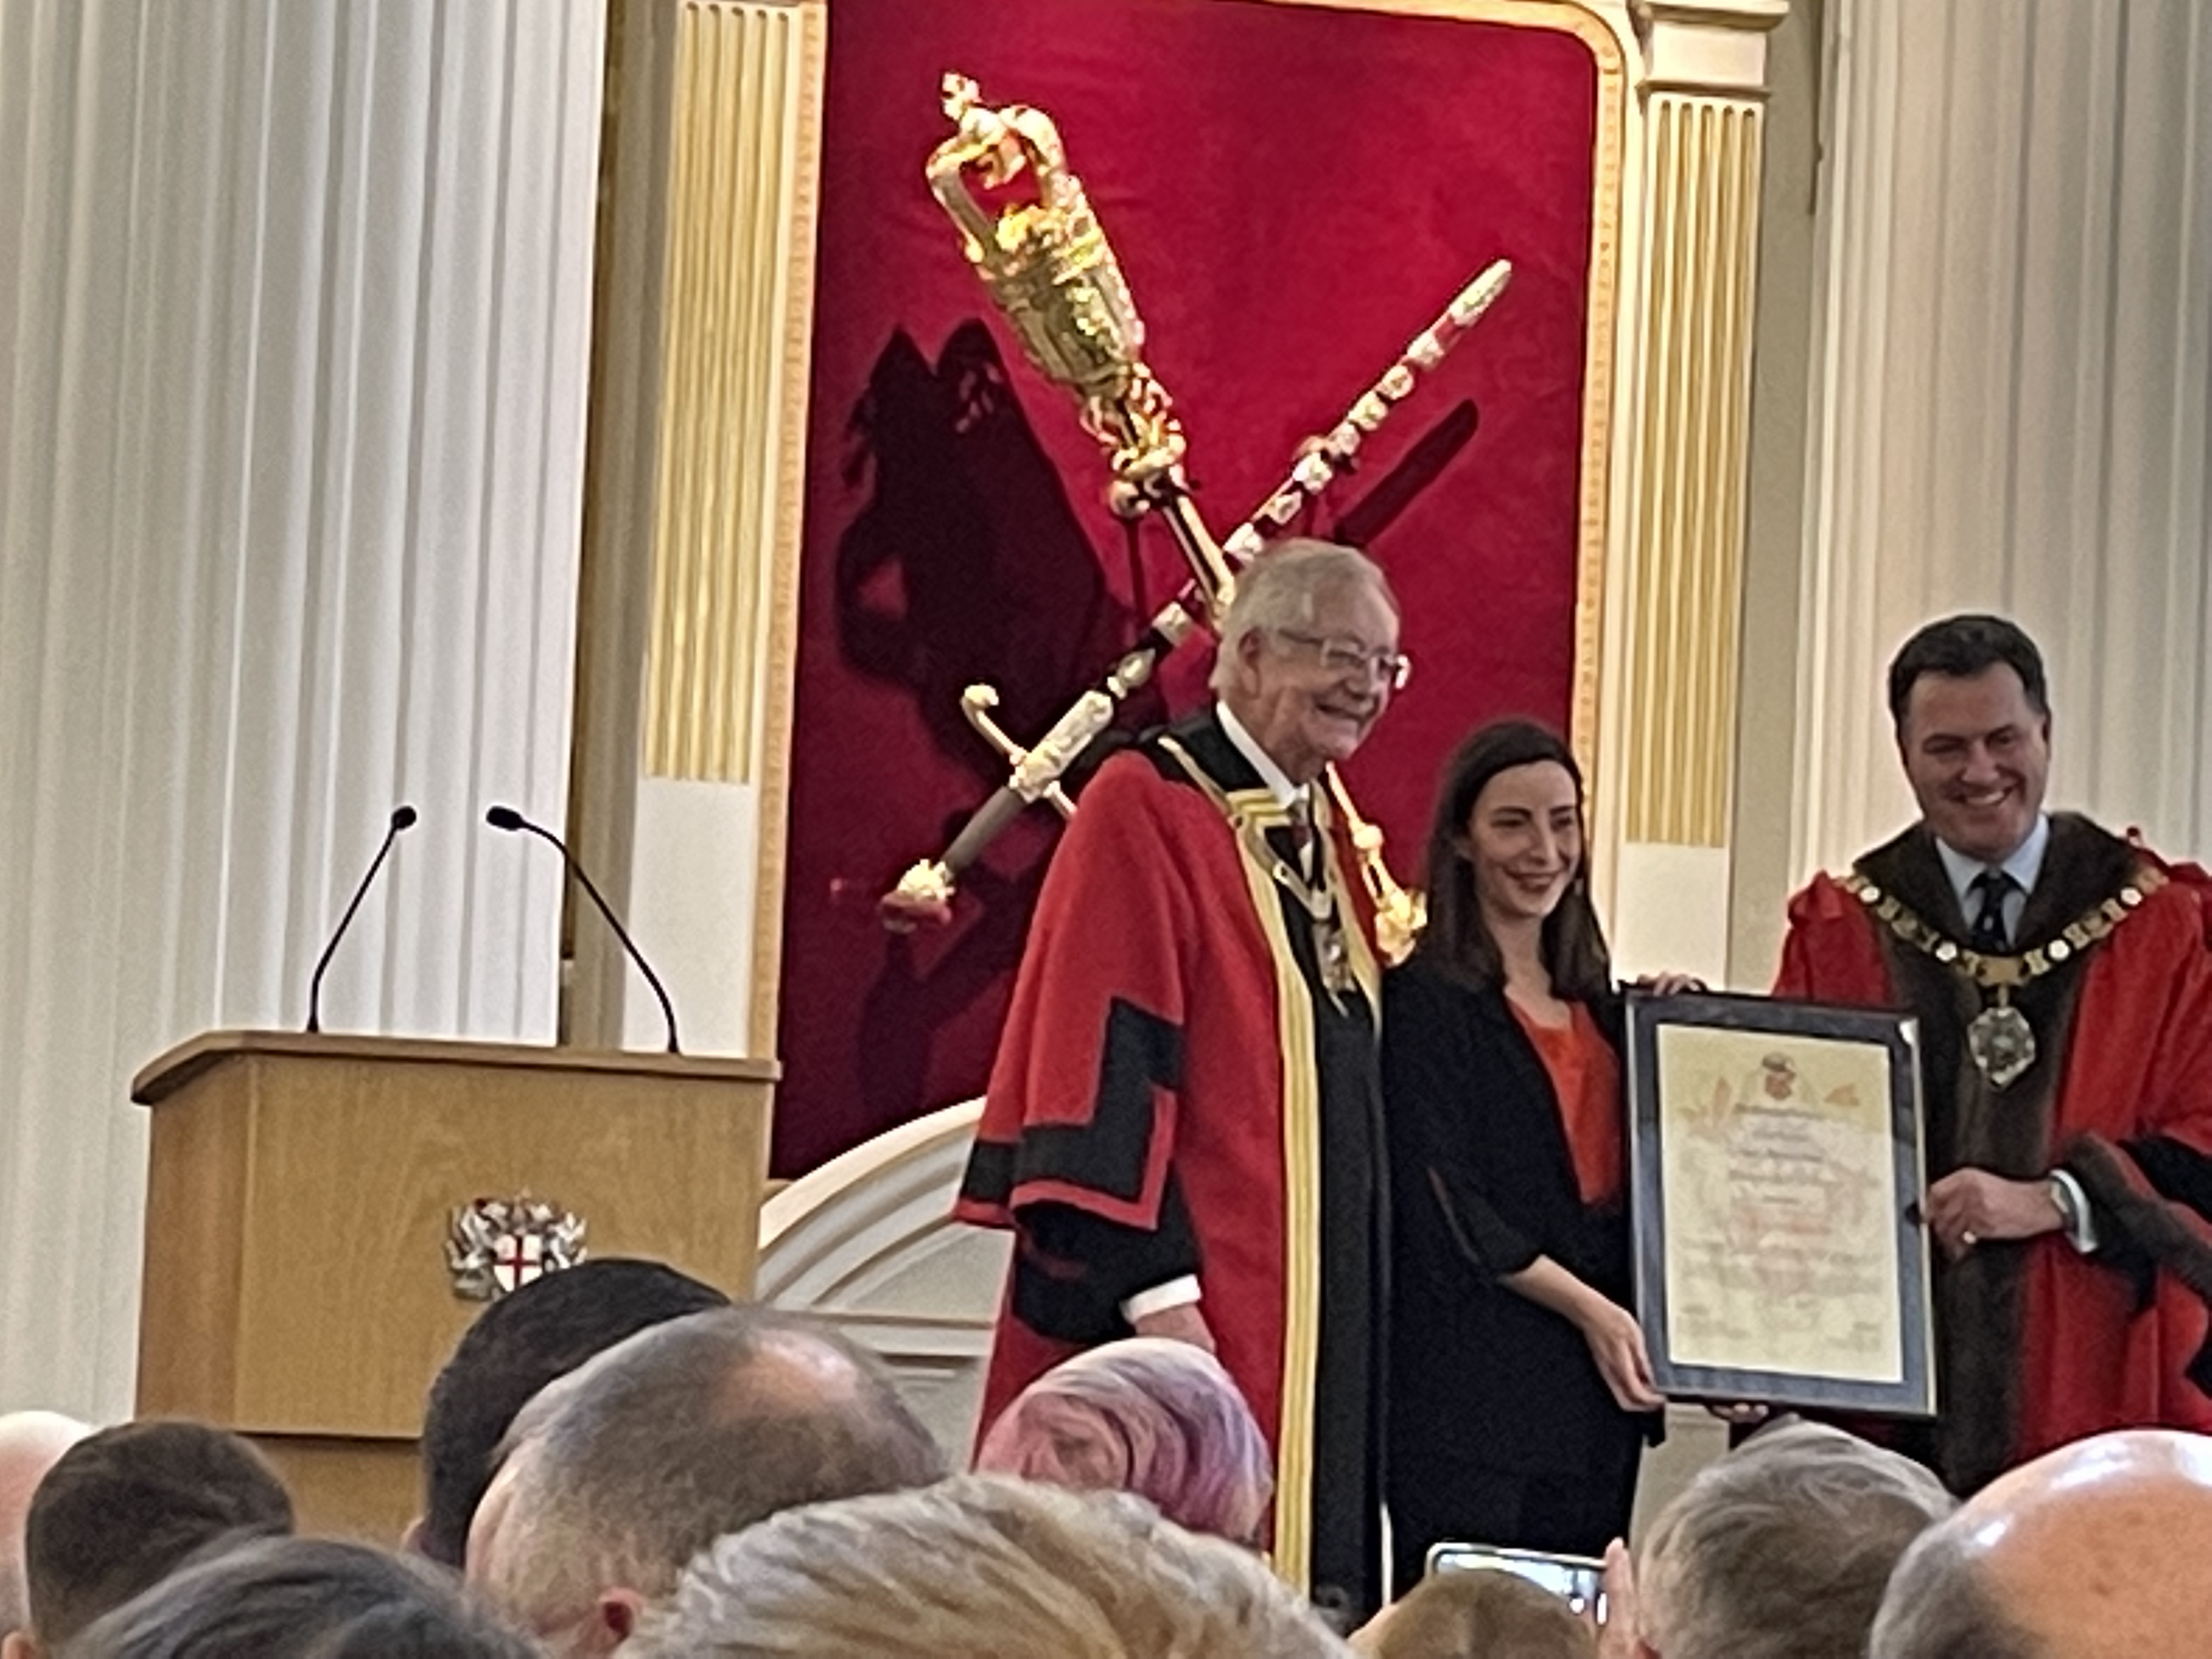 Anna Koukoullis Is Presented Wit The Master’s Journeyman Certificate By The Lord Mayor In Mansion House On 14 March 2022